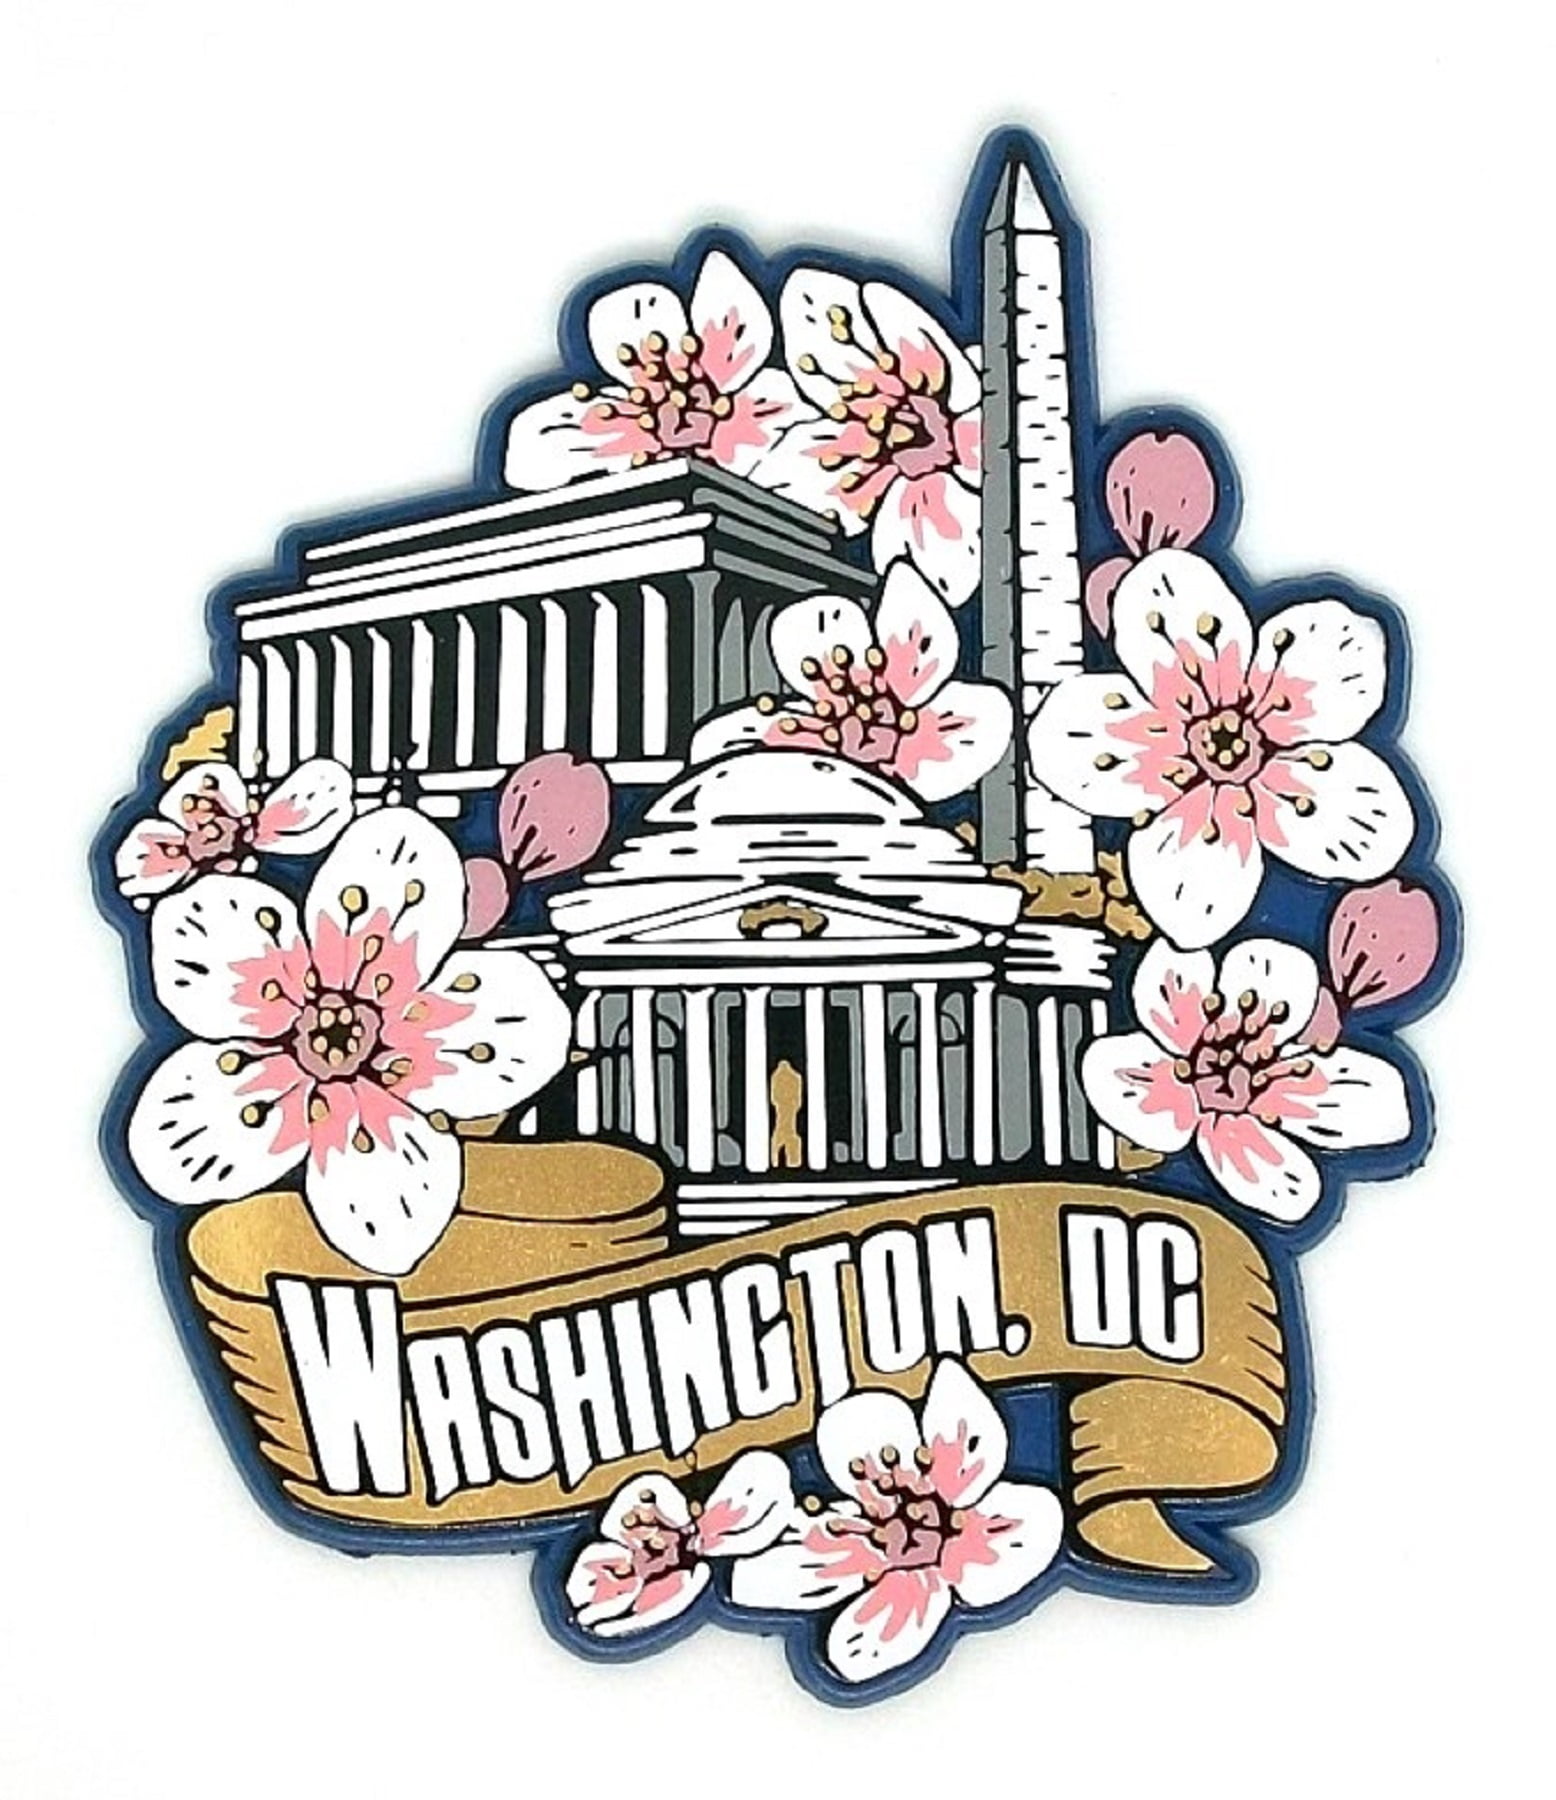 Washington D.C Snowglobe Magnet wth Panoramic Monuments and Cherry Blossoms 